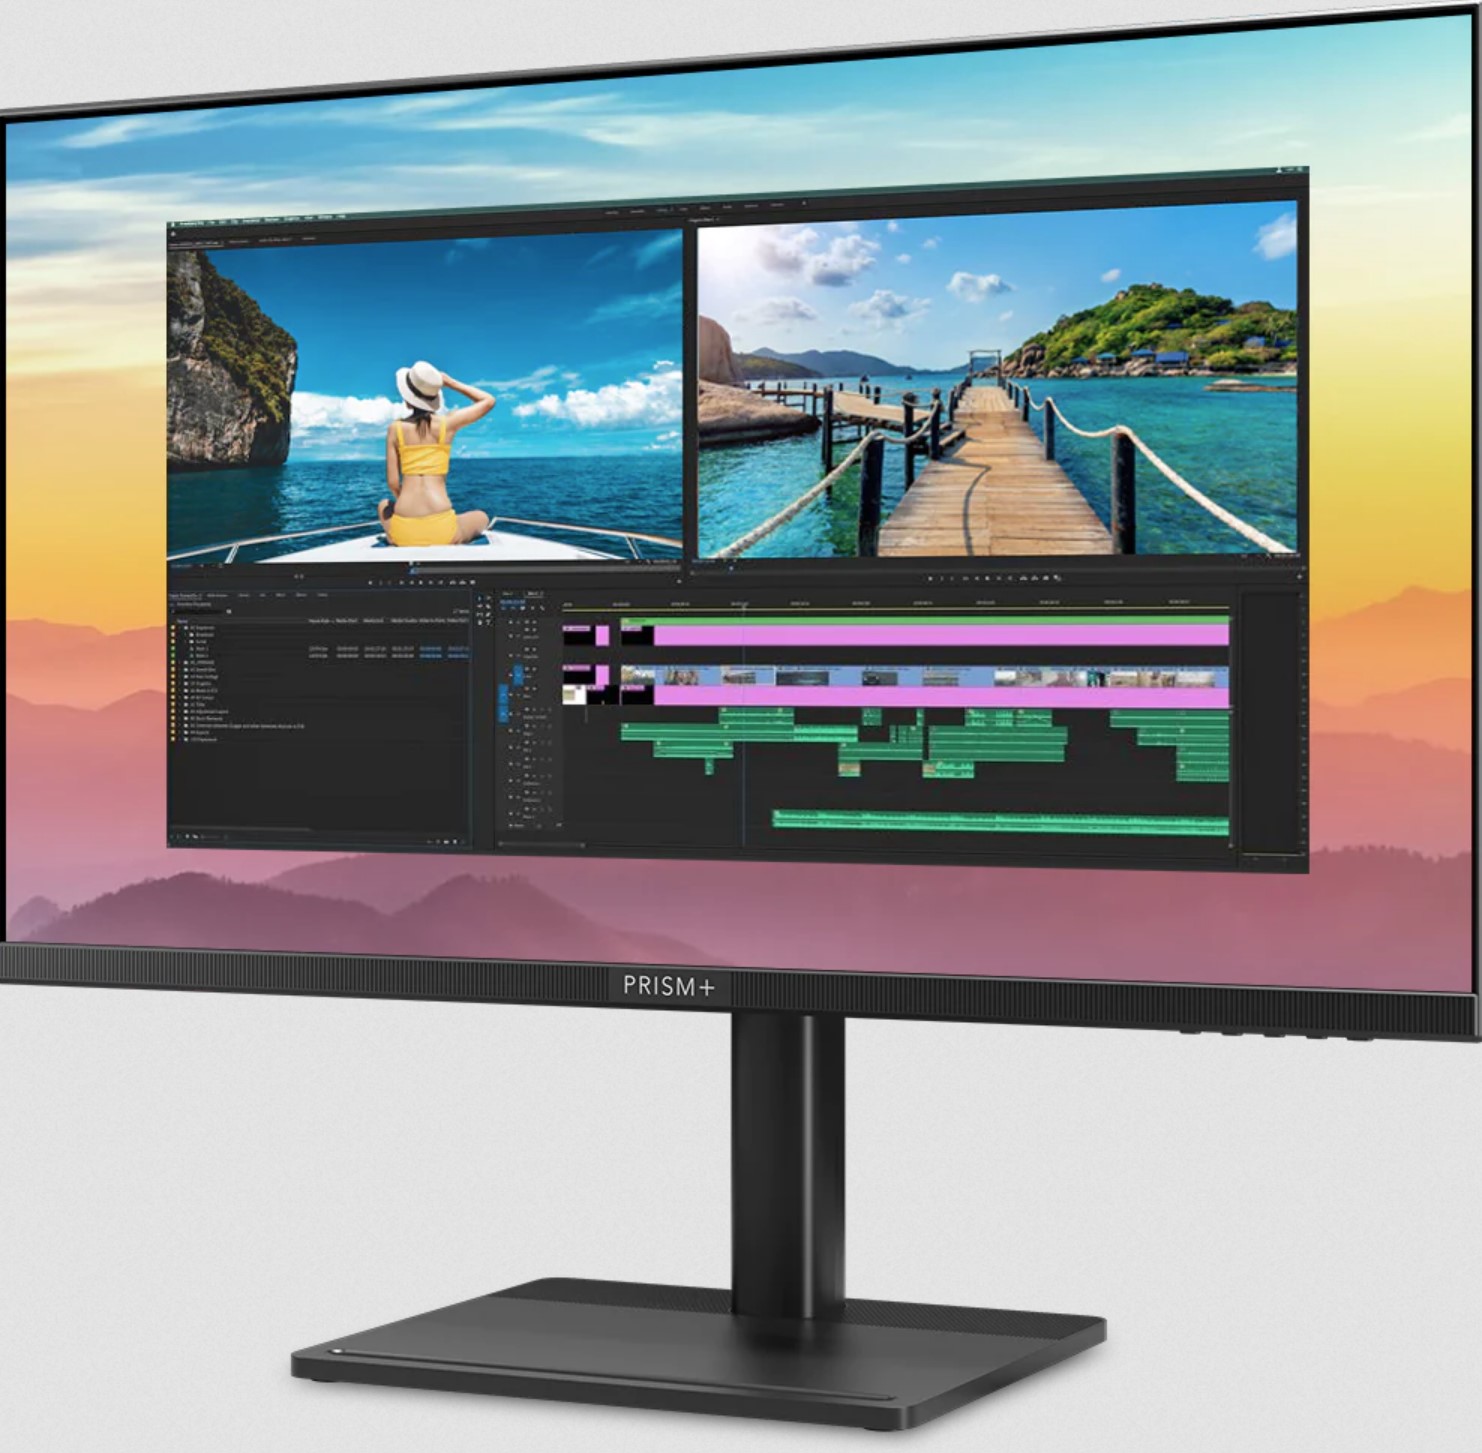 PRISM+ W280 Ultra 28” 4K monitor – great image and price (review)